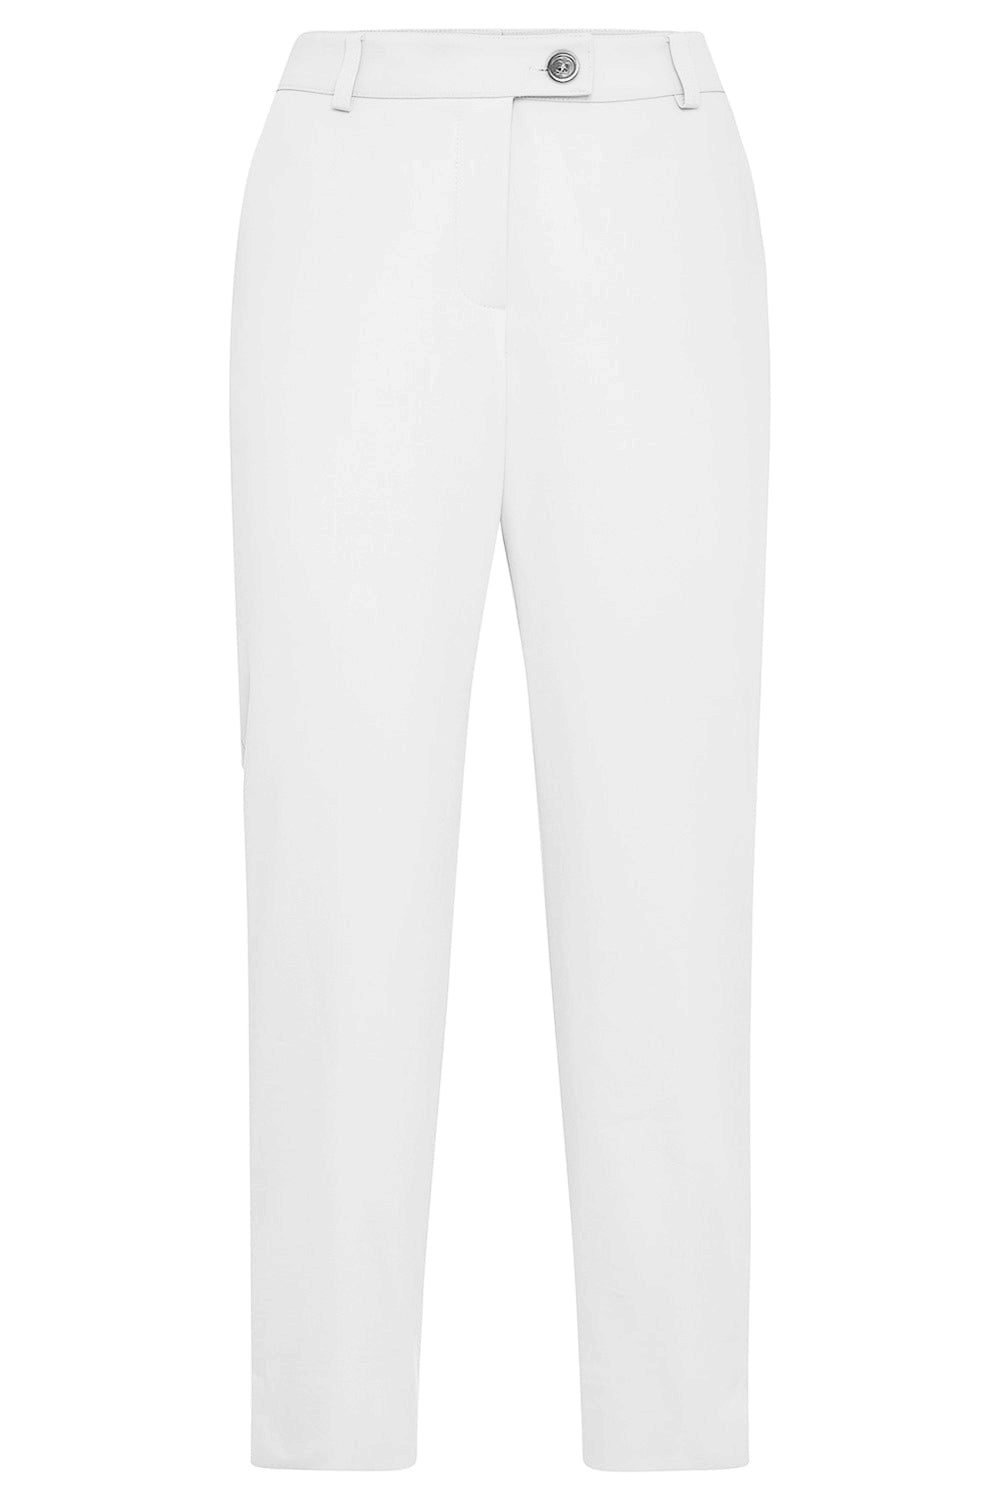 MAISON COMMON-Tab Front Slim Ankle Pant - Ivory-